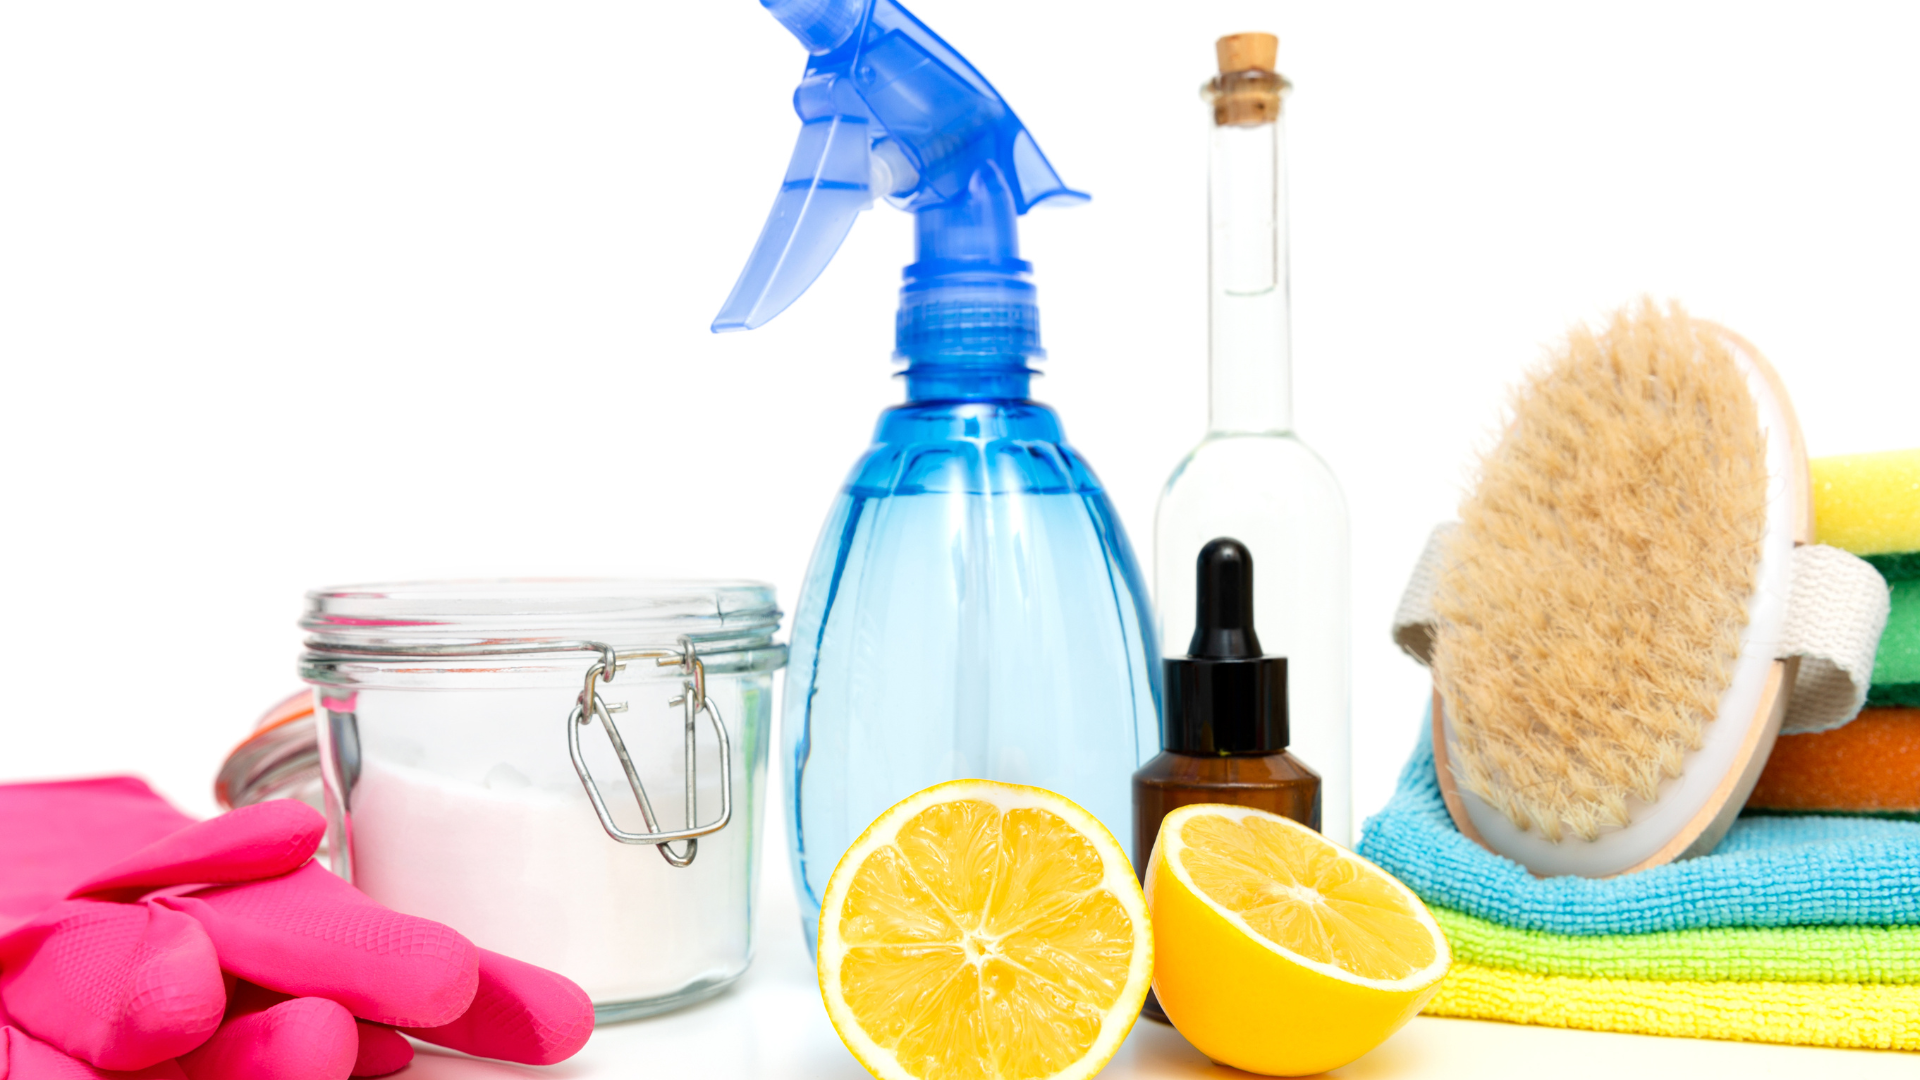 Natural Cleaning Products: 5 Eco-Friendly Cleaning Products to Use at Home